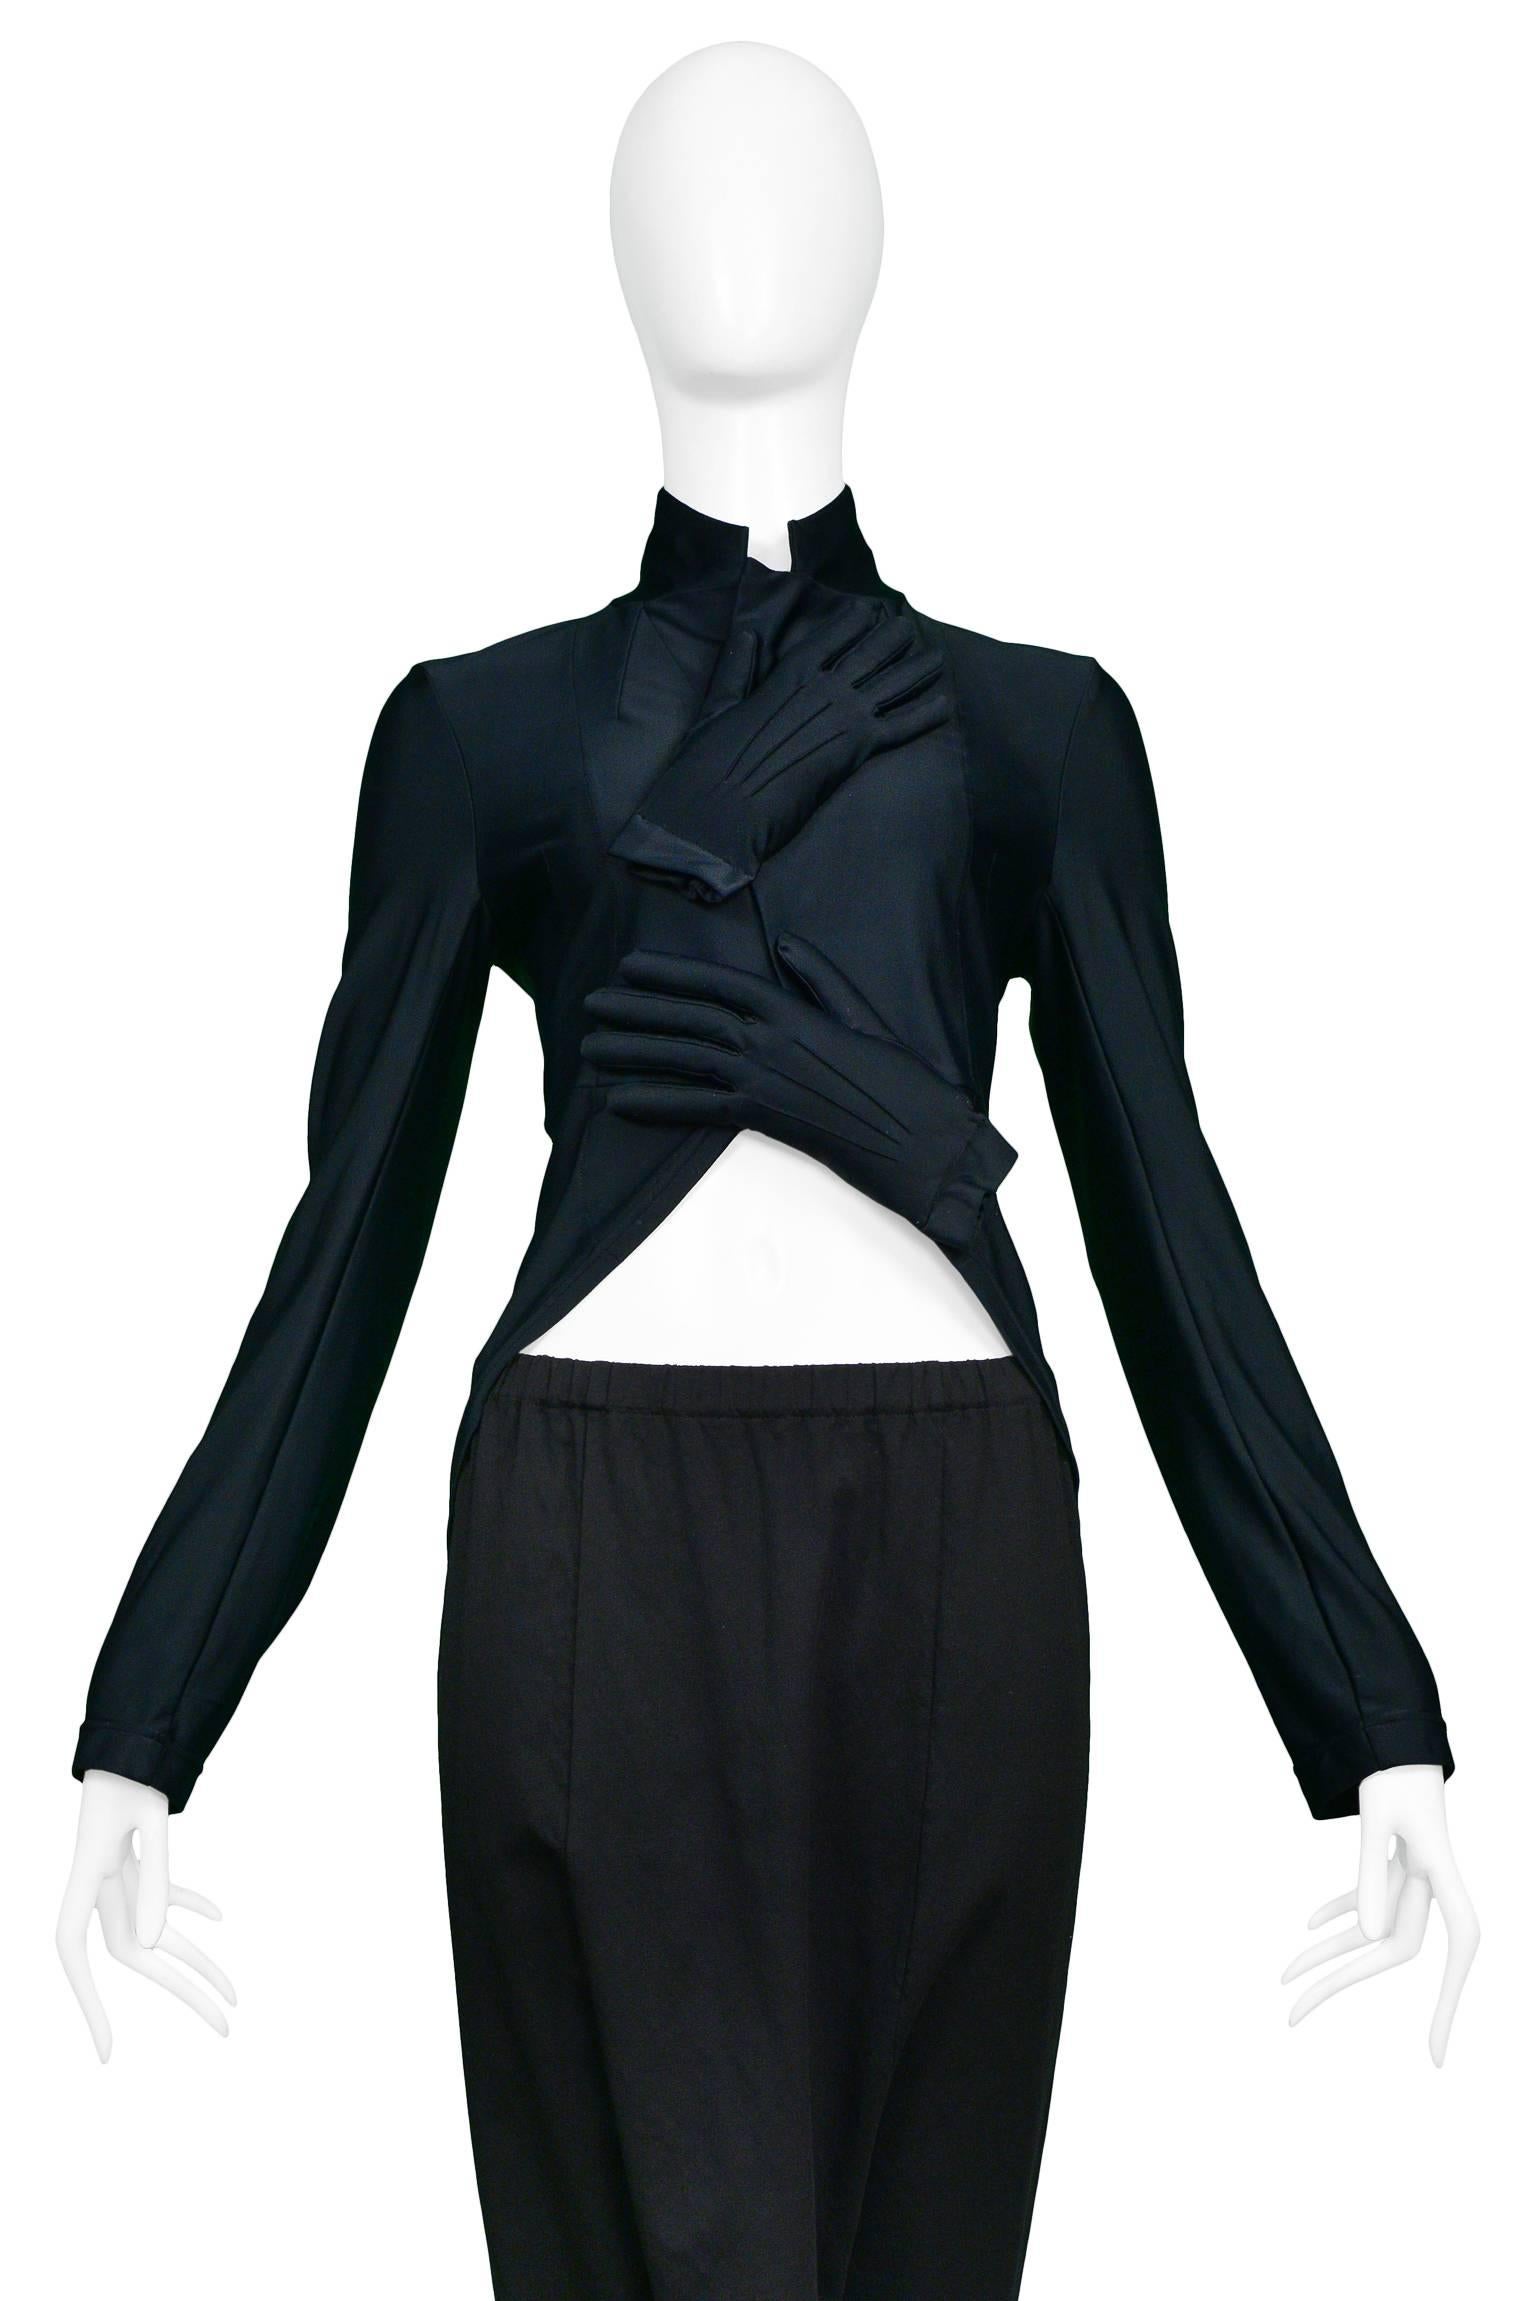 Vintage Comme des Garcons ensemble featuring an iconic black spandex padded glove top and matching black wool harem pants.